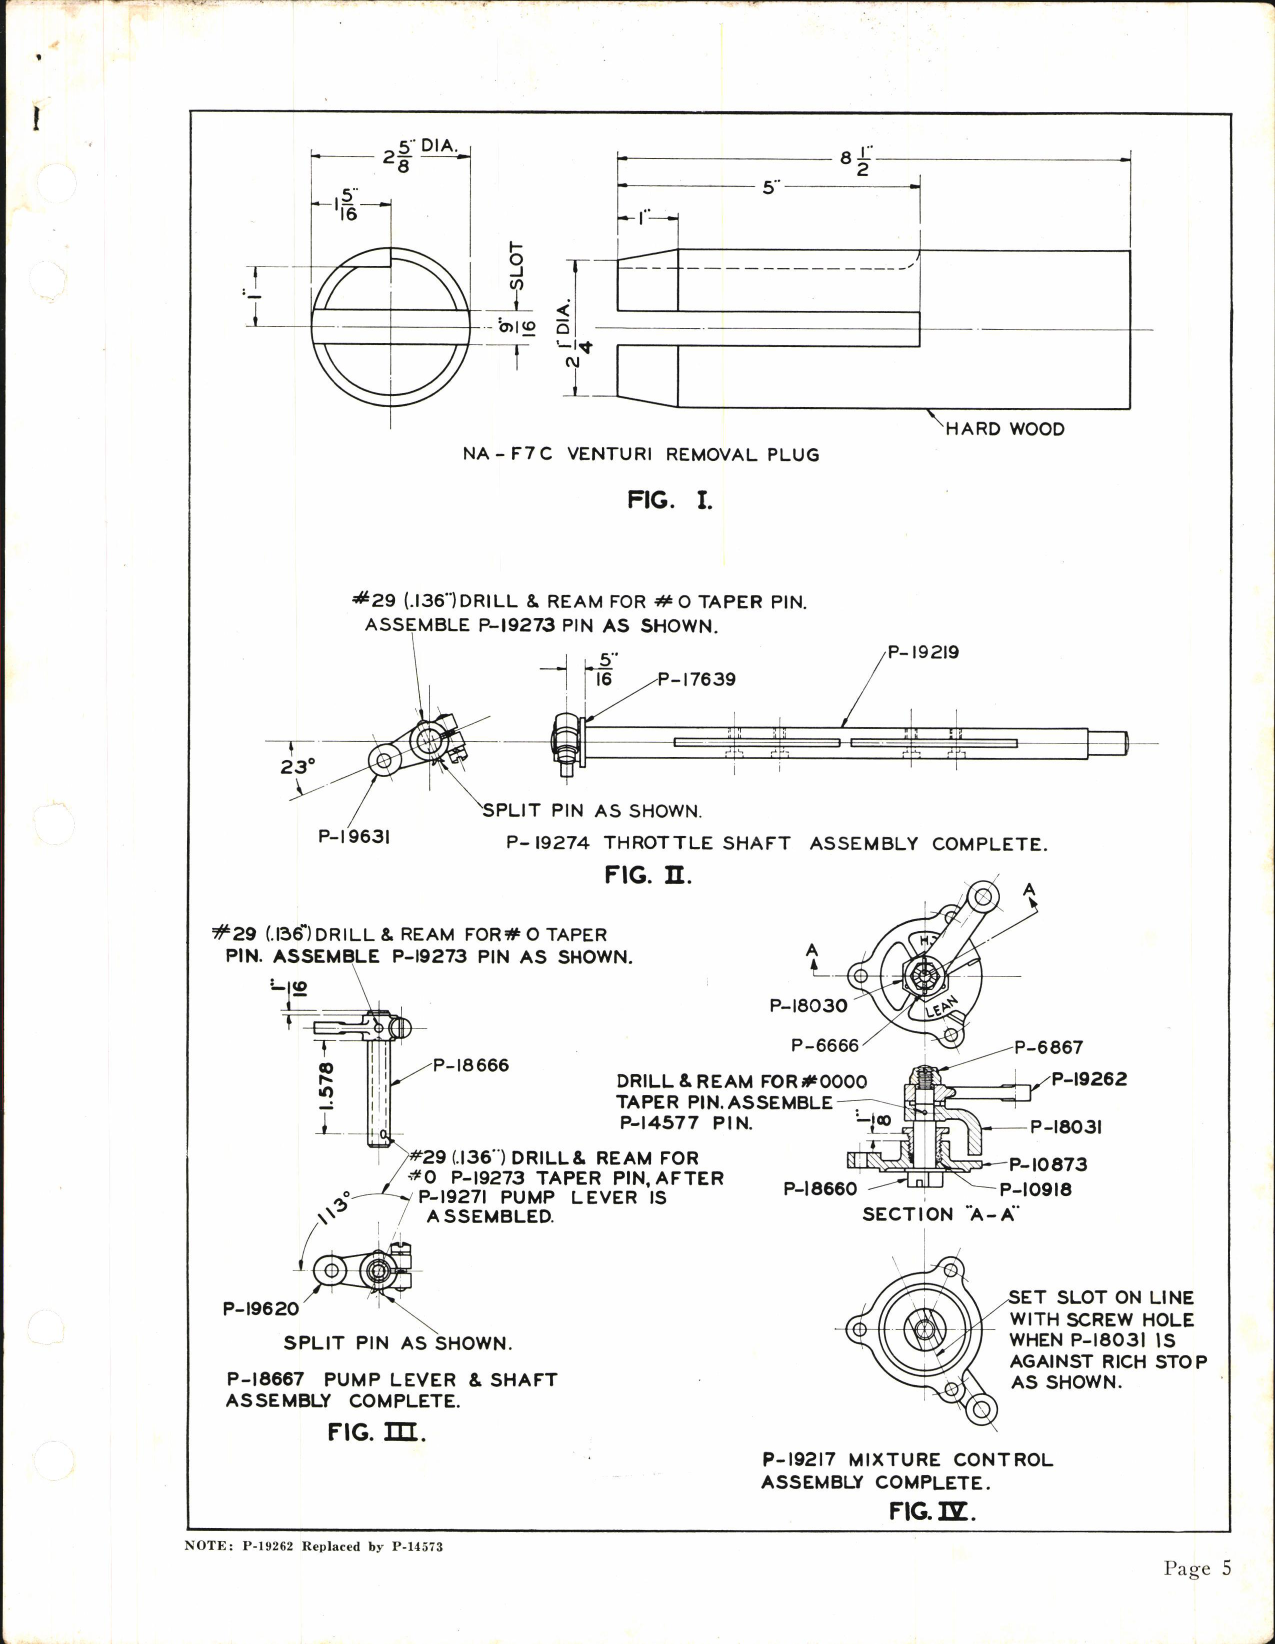 Sample page 5 from AirCorps Library document: Instructions on Stromberg NA-F7C Carburetors